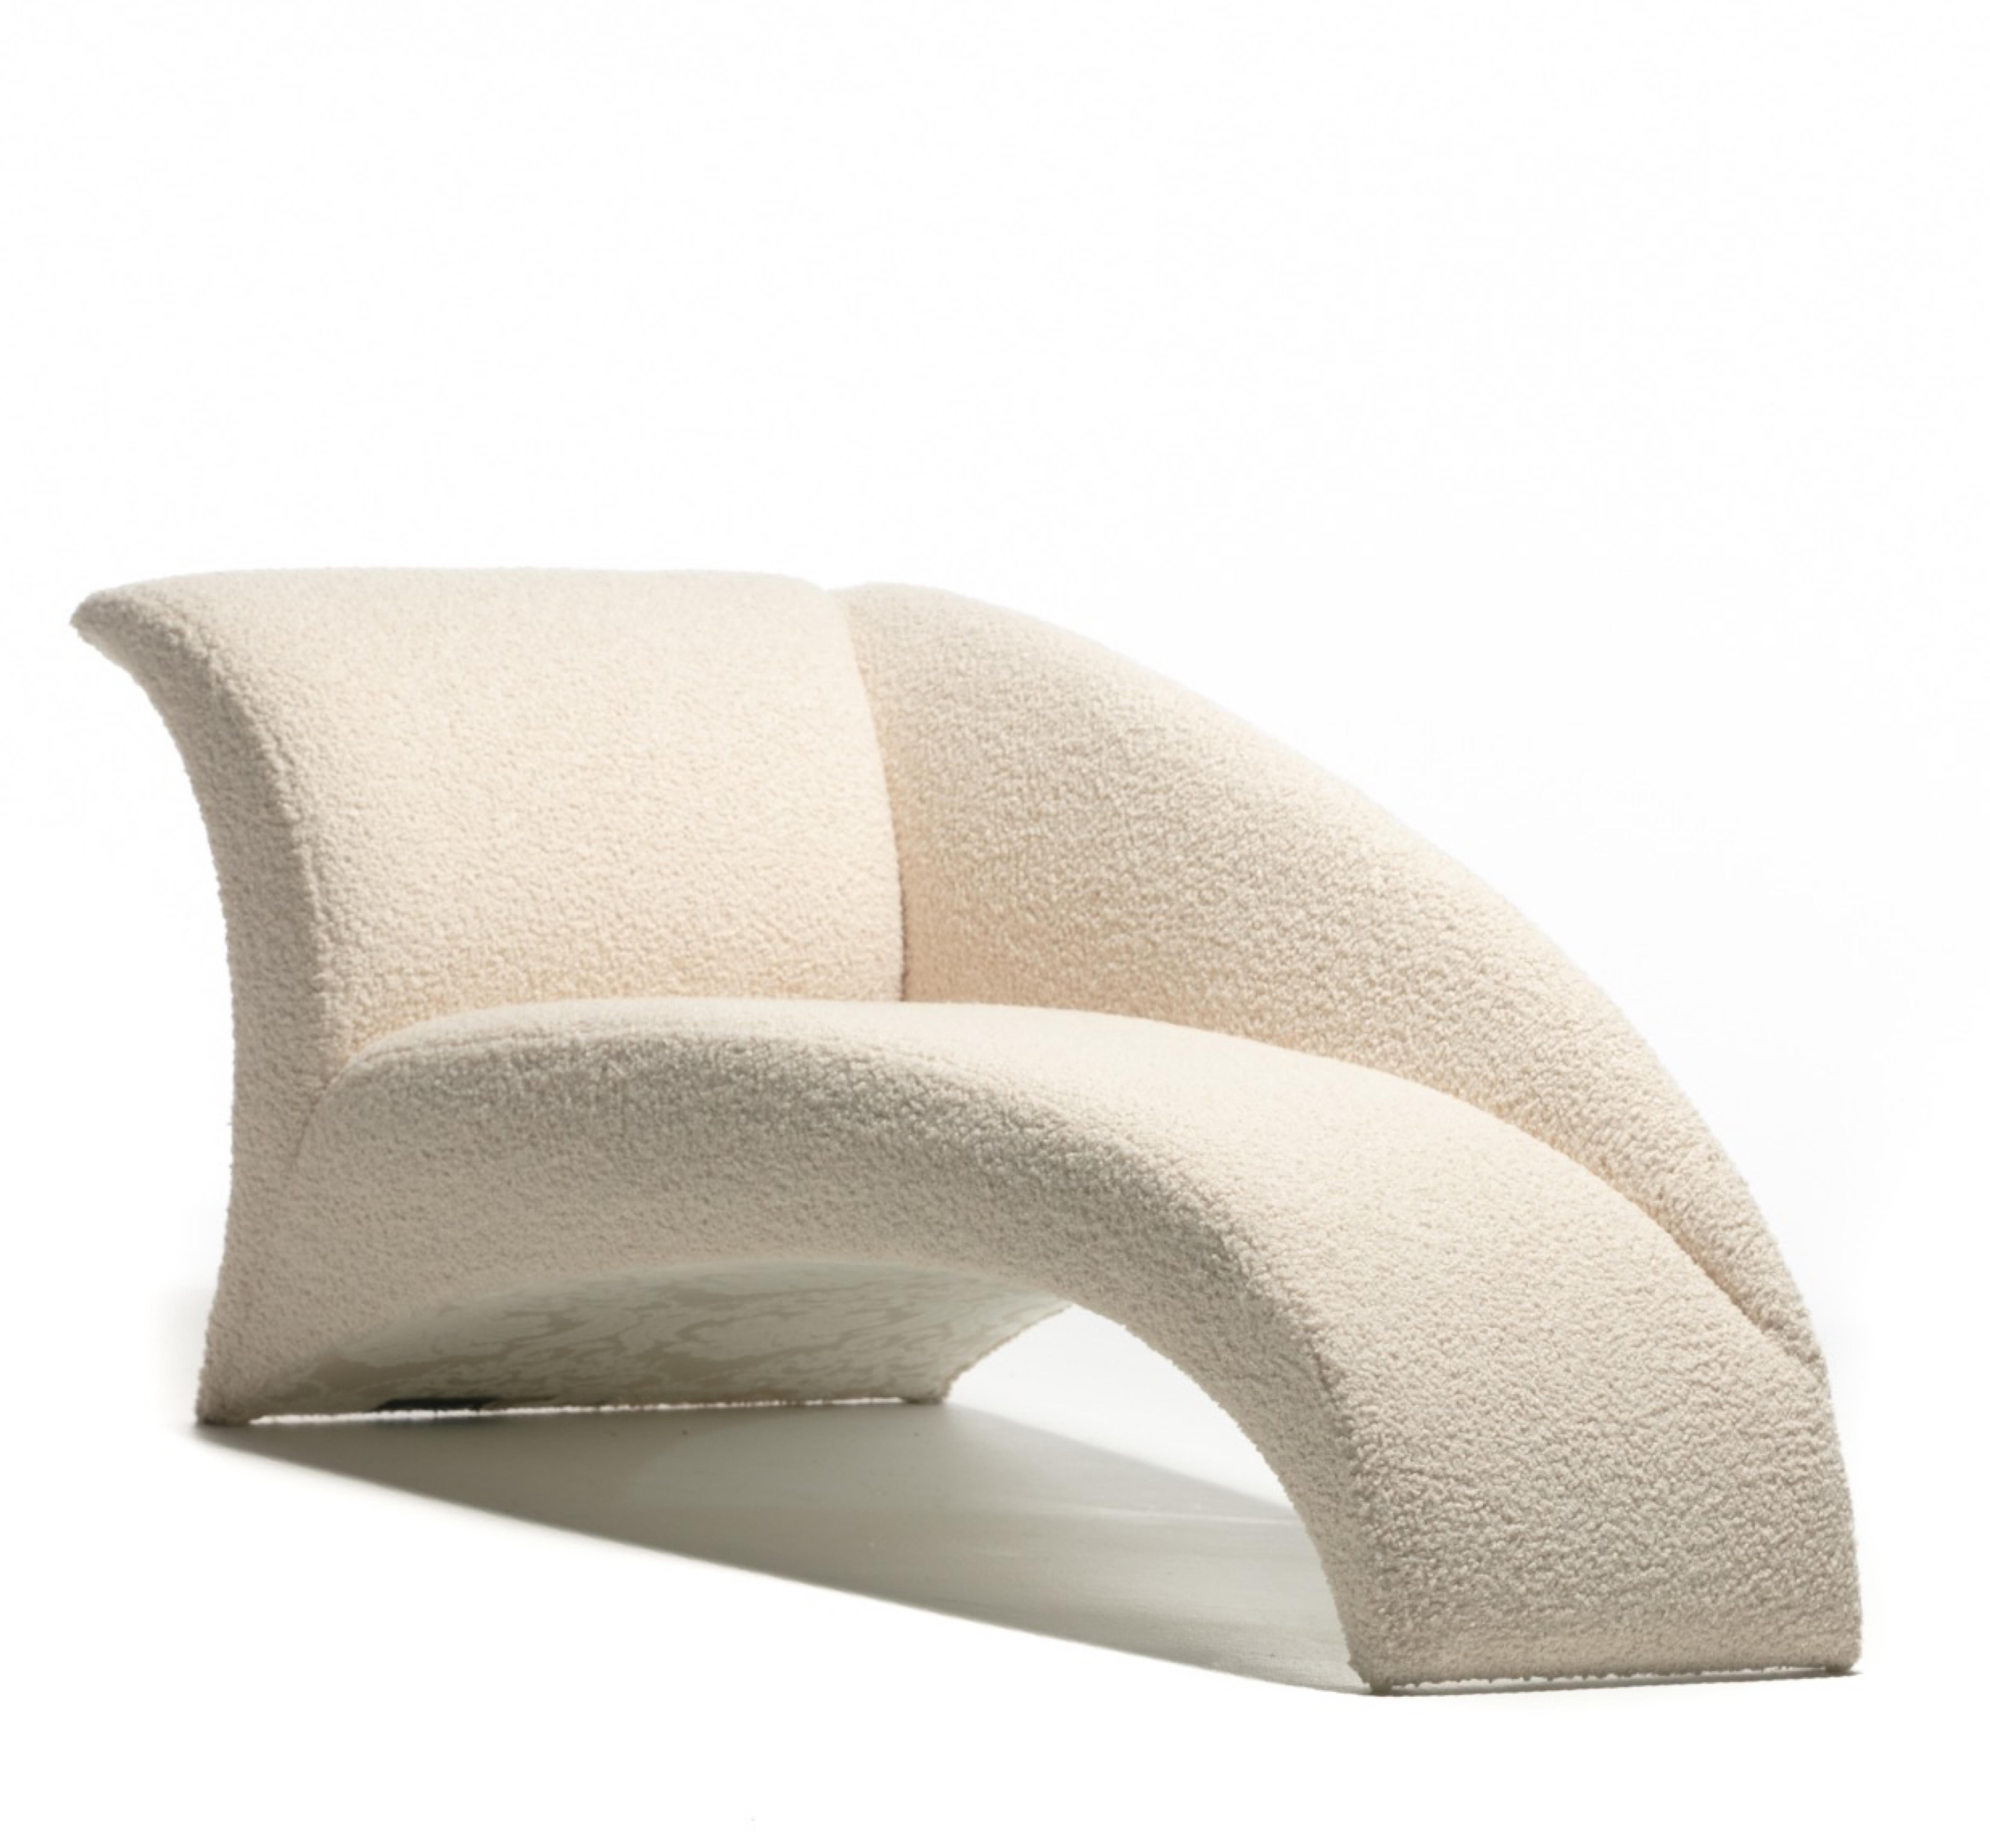 Whisk yourself away from the worries of the day in this exquisite Pair of Post Modern Chaise Lounges by renowned Designer Vladimir Kagan for Directional. Modern. Chic. High Art. Unlike traditional chaise lounges that seem to anchor heavily in a